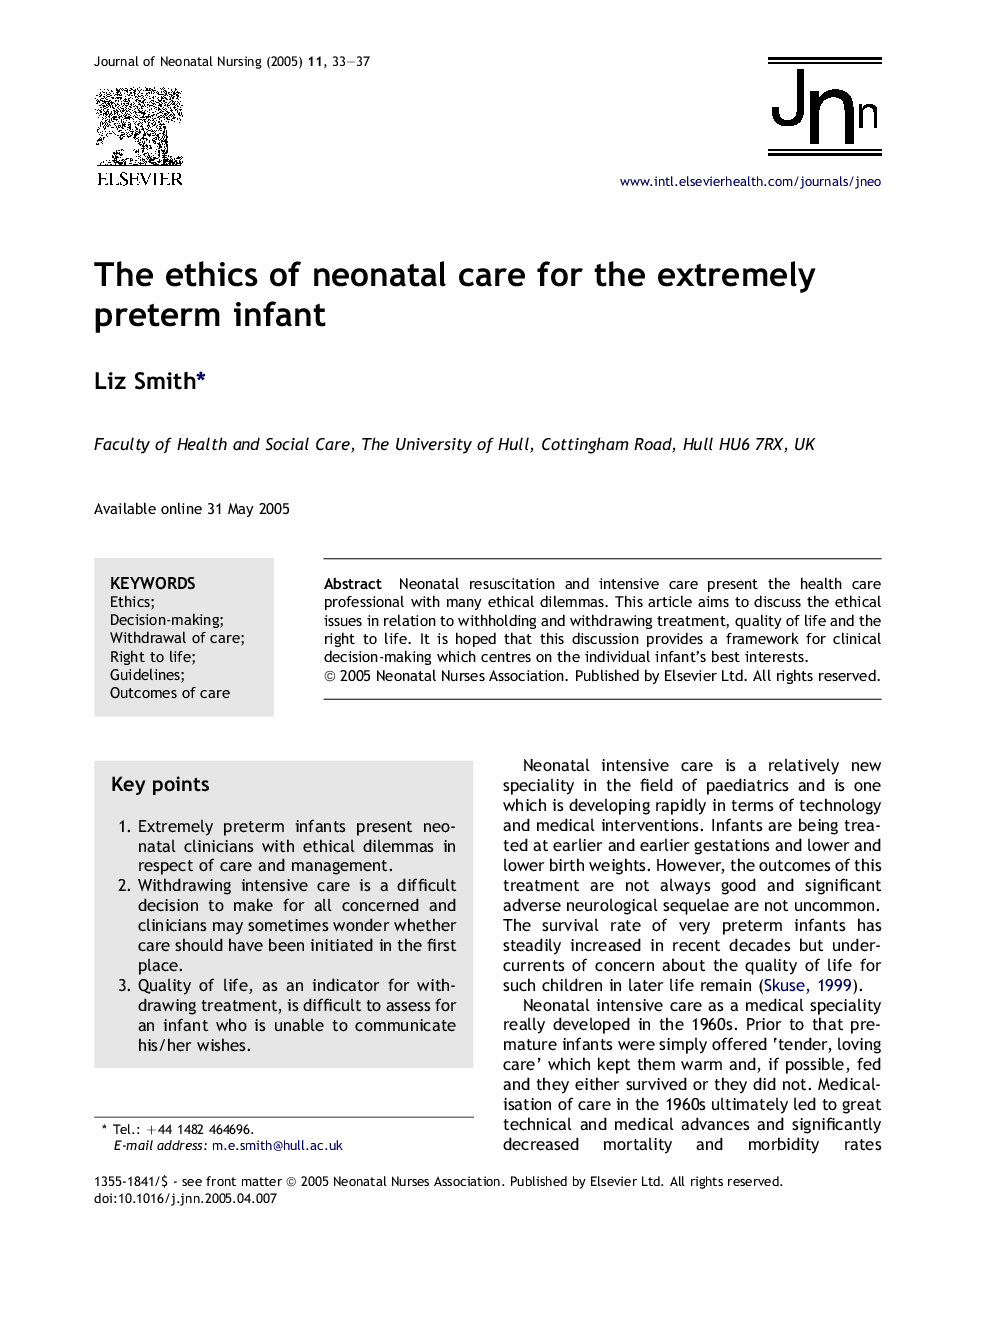 The ethics of neonatal care for the extremely preterm infant